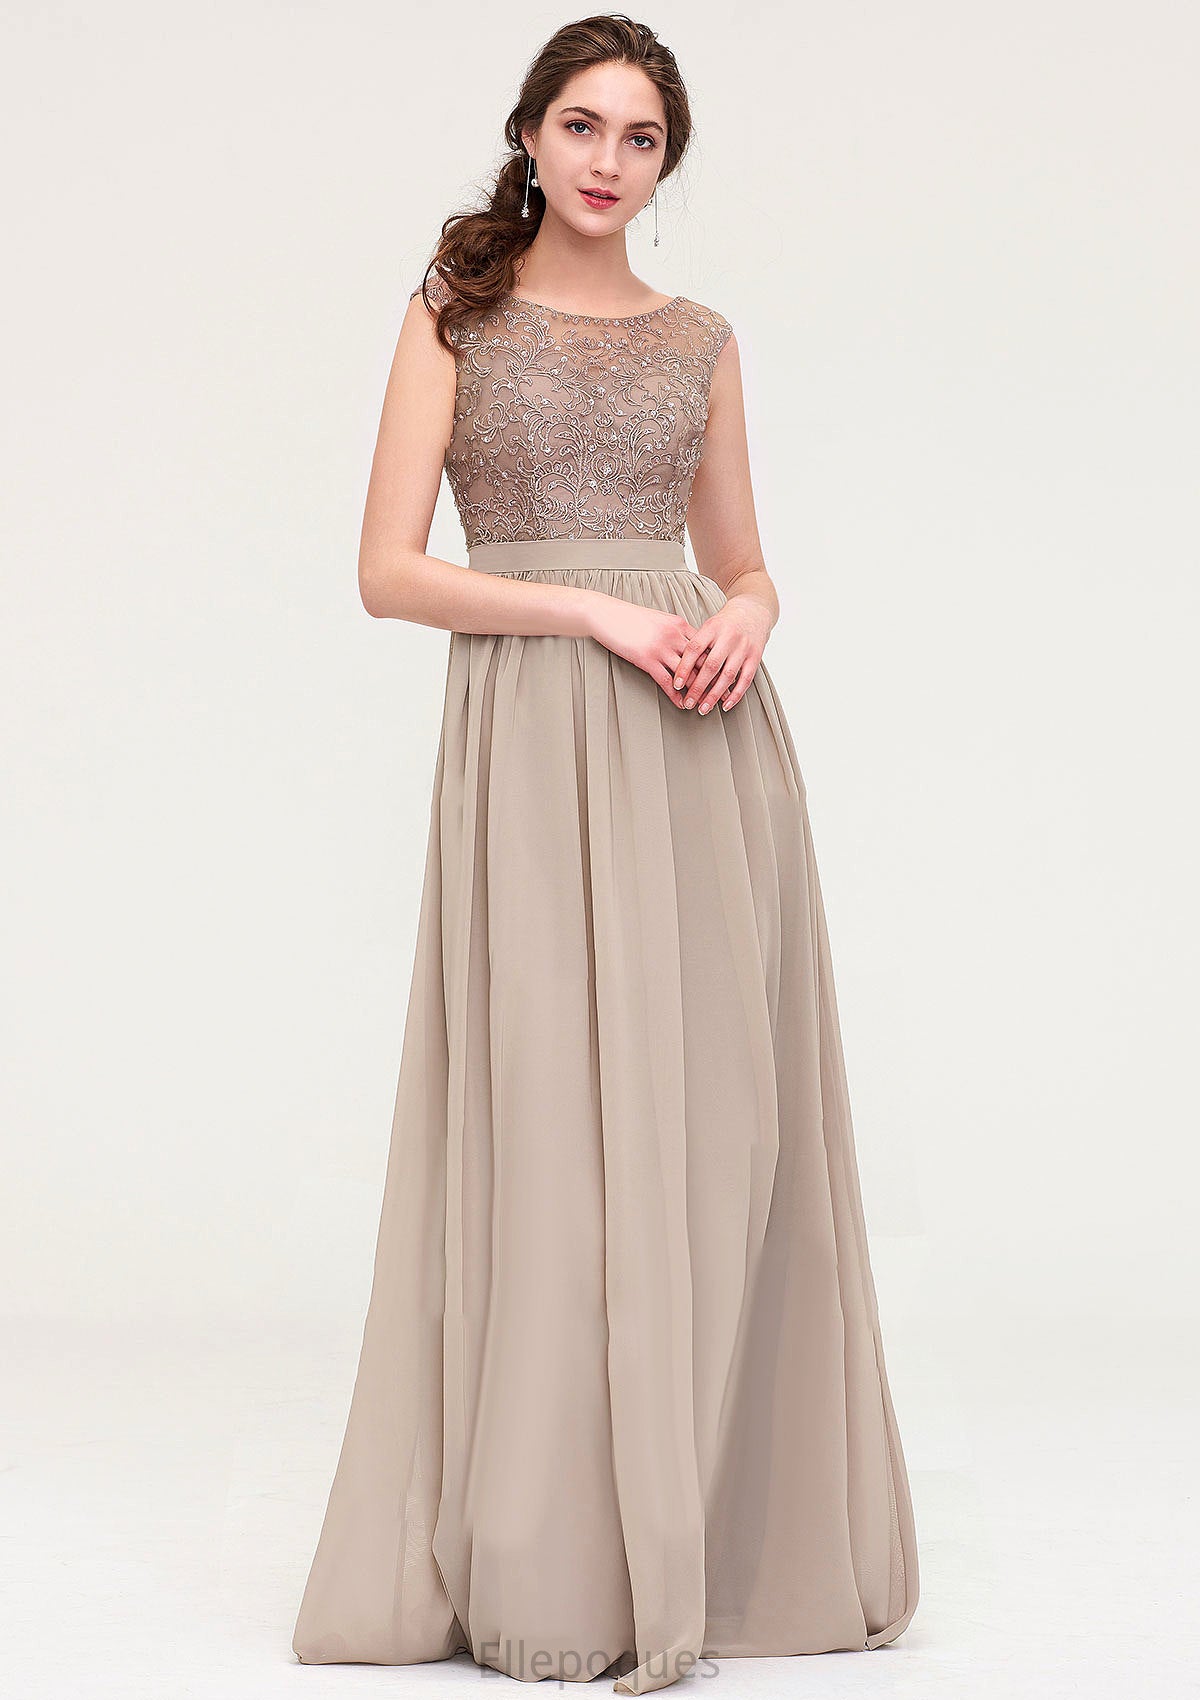 Sleeveless Scoop Neck Long/Floor-Length Chiffon A-line/Princess Bridesmaid Dresses With Sequins Beading Lace Pleated Dalia HOP0025493